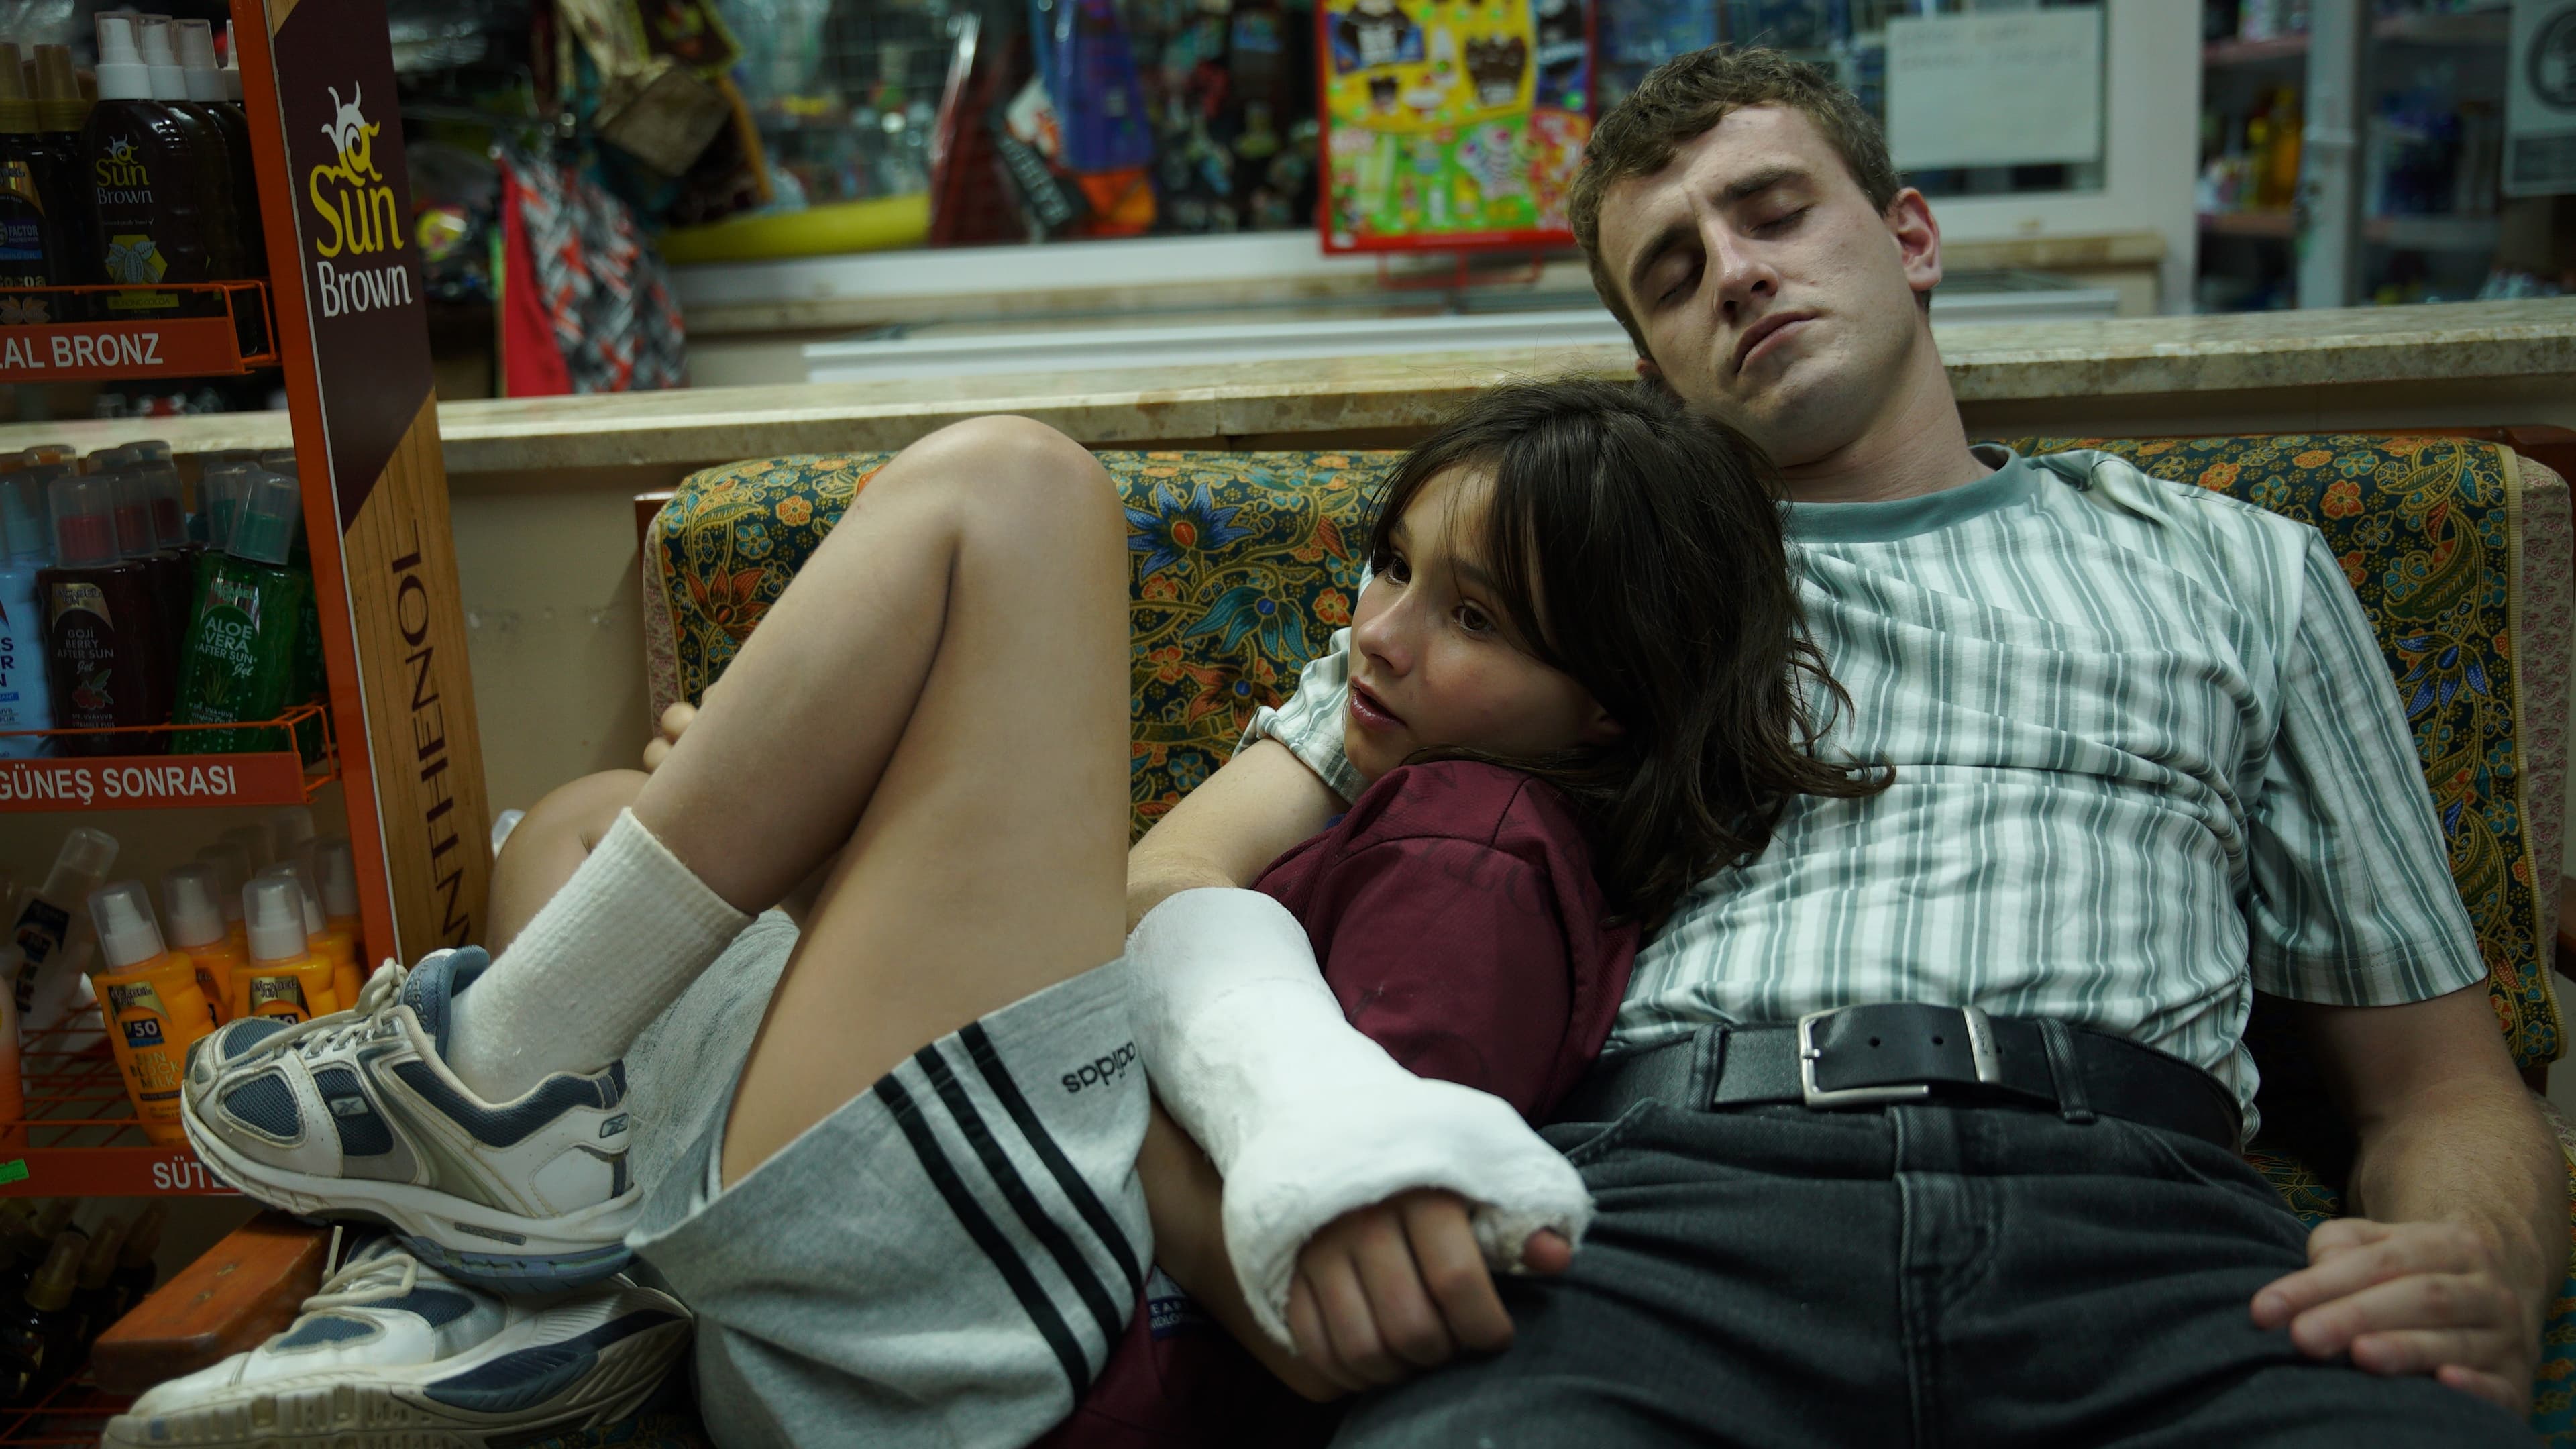 A young girl is held in the arms of a young man with a cast on his lower right arm in this still from Aftersun.